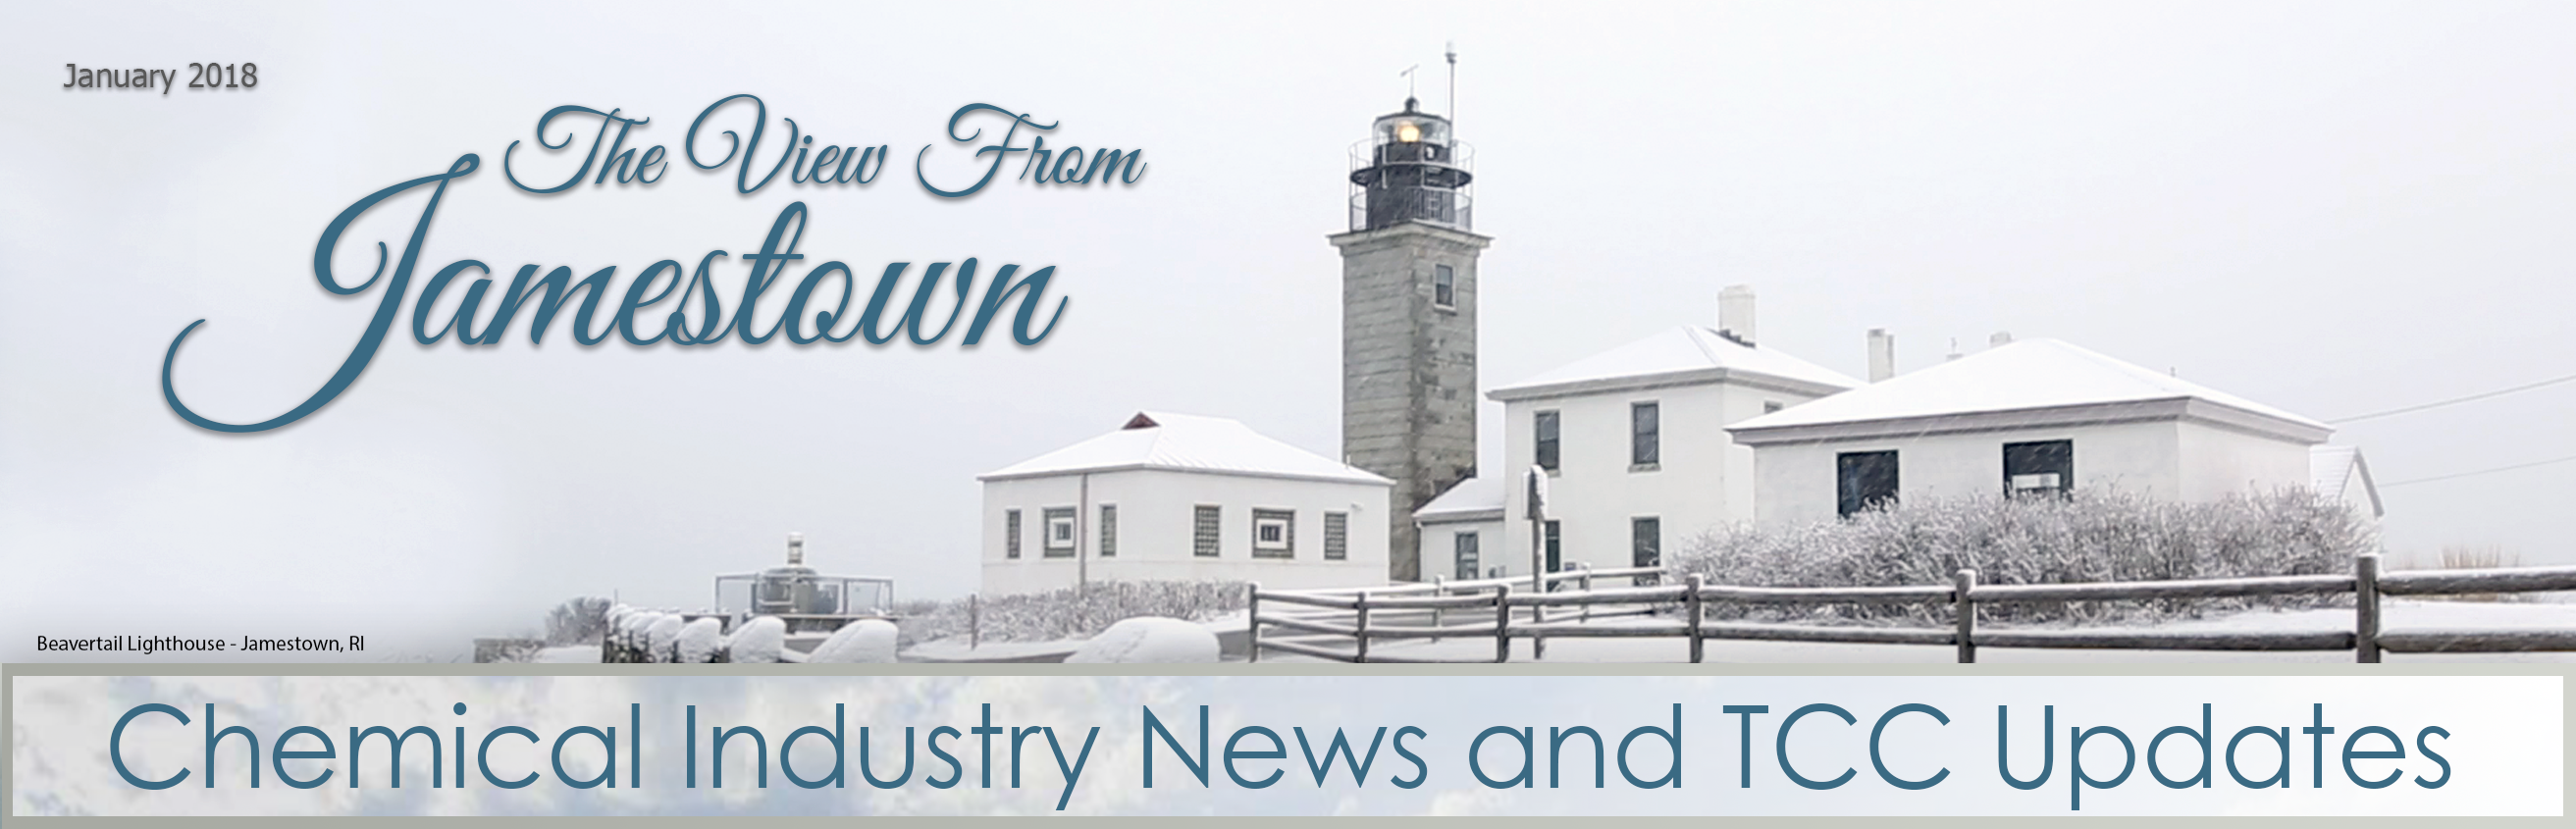 The View From jamestown January 2018 - The Chemical Company | Chemical Distributor